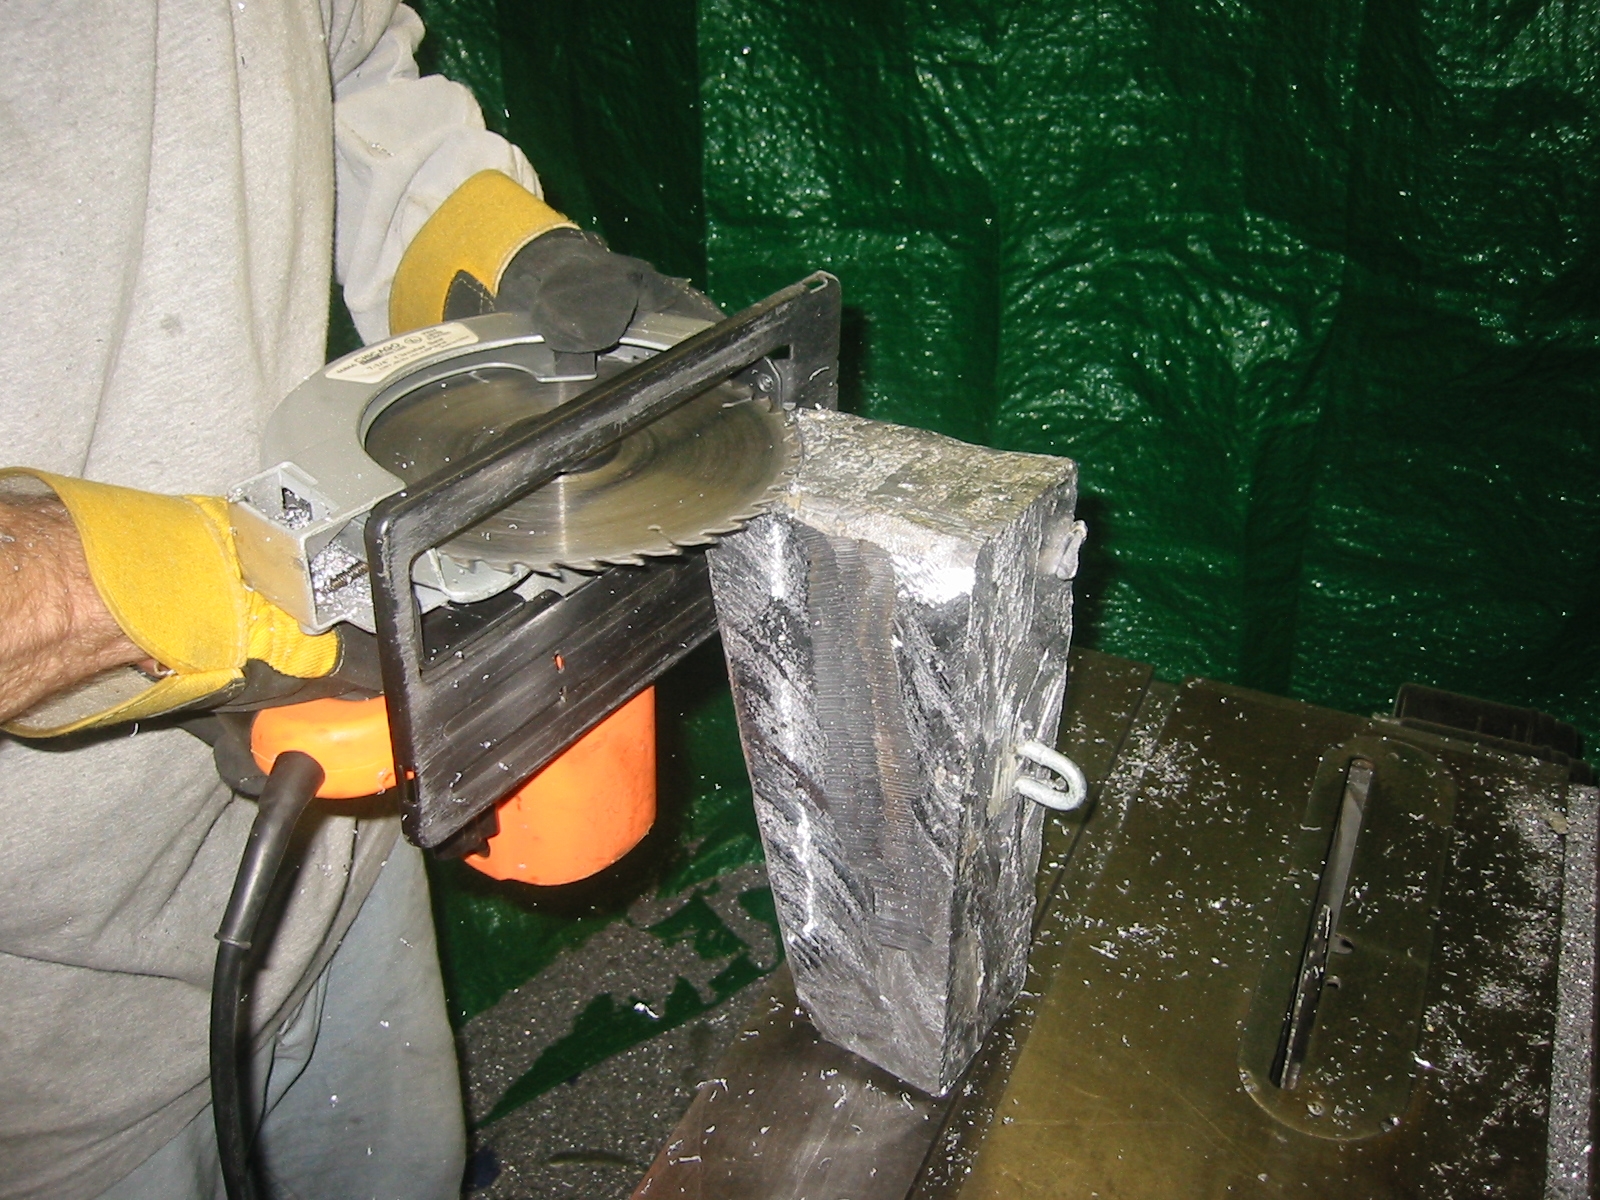 (4) We trimmed the lead blocks  with a skill saw using a carbide blade.  Tarps were hung to catch the chips.